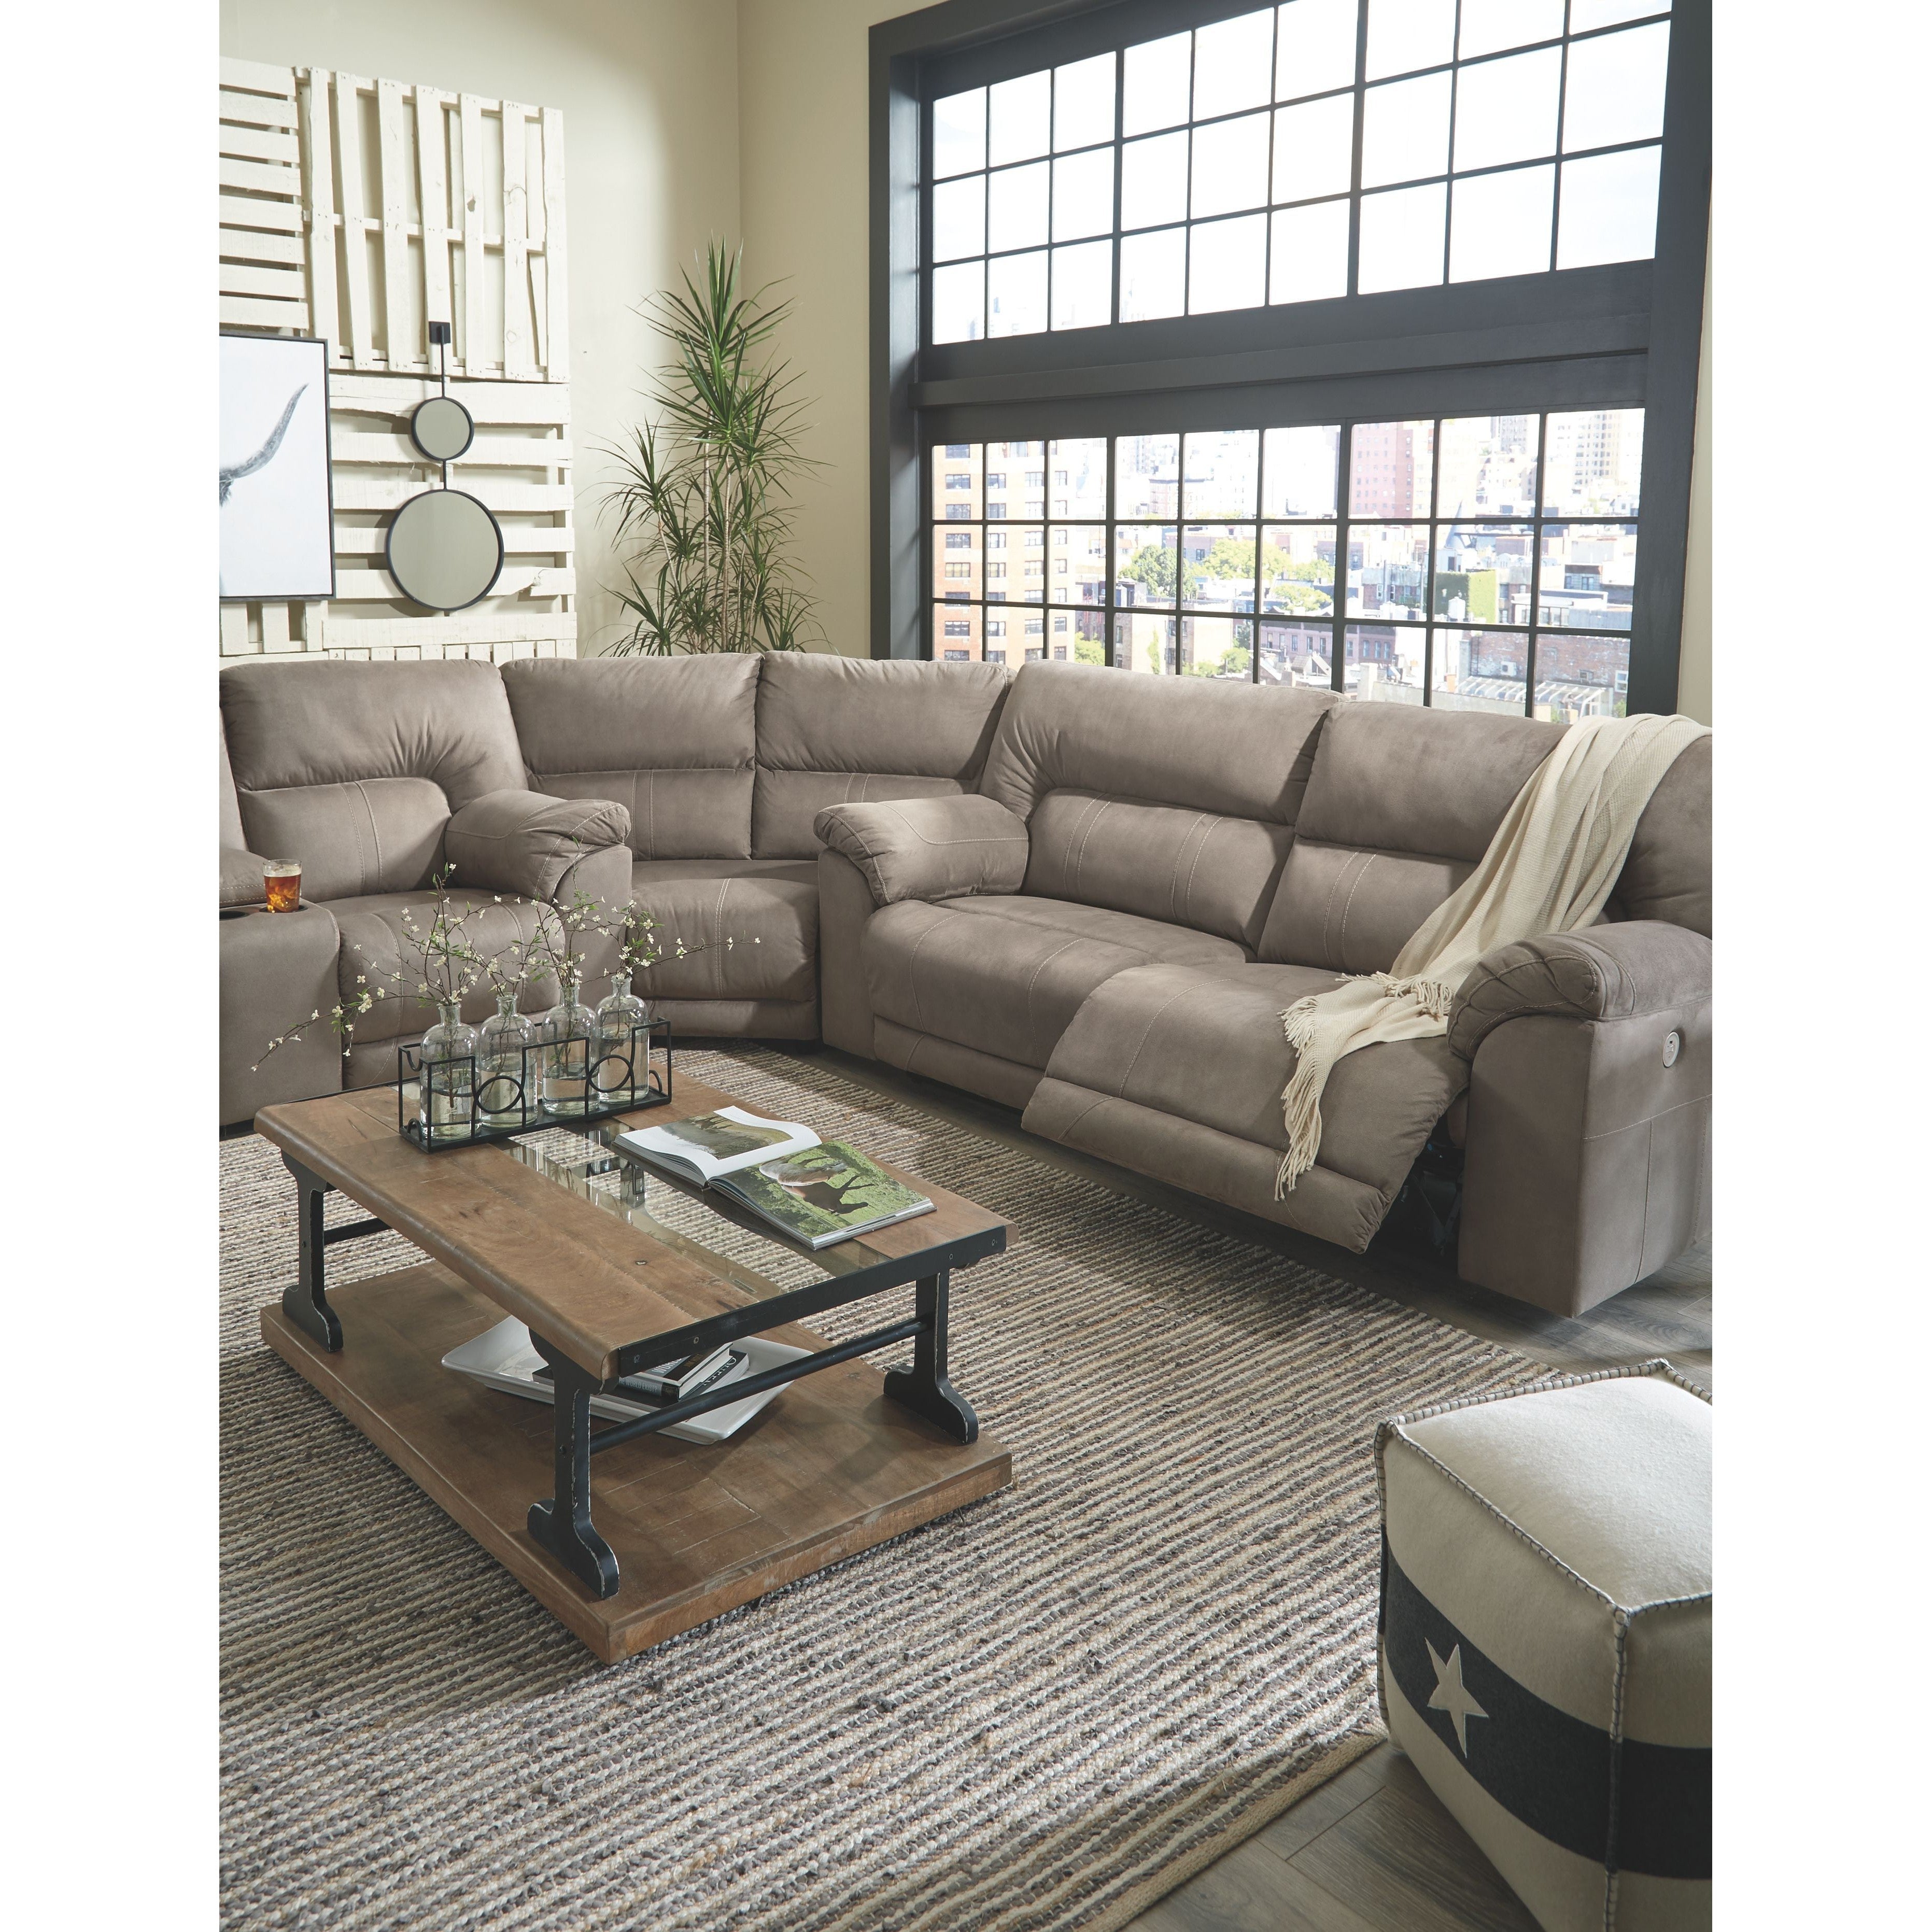 Cavalcade - Slate - Power Reclining Sectional